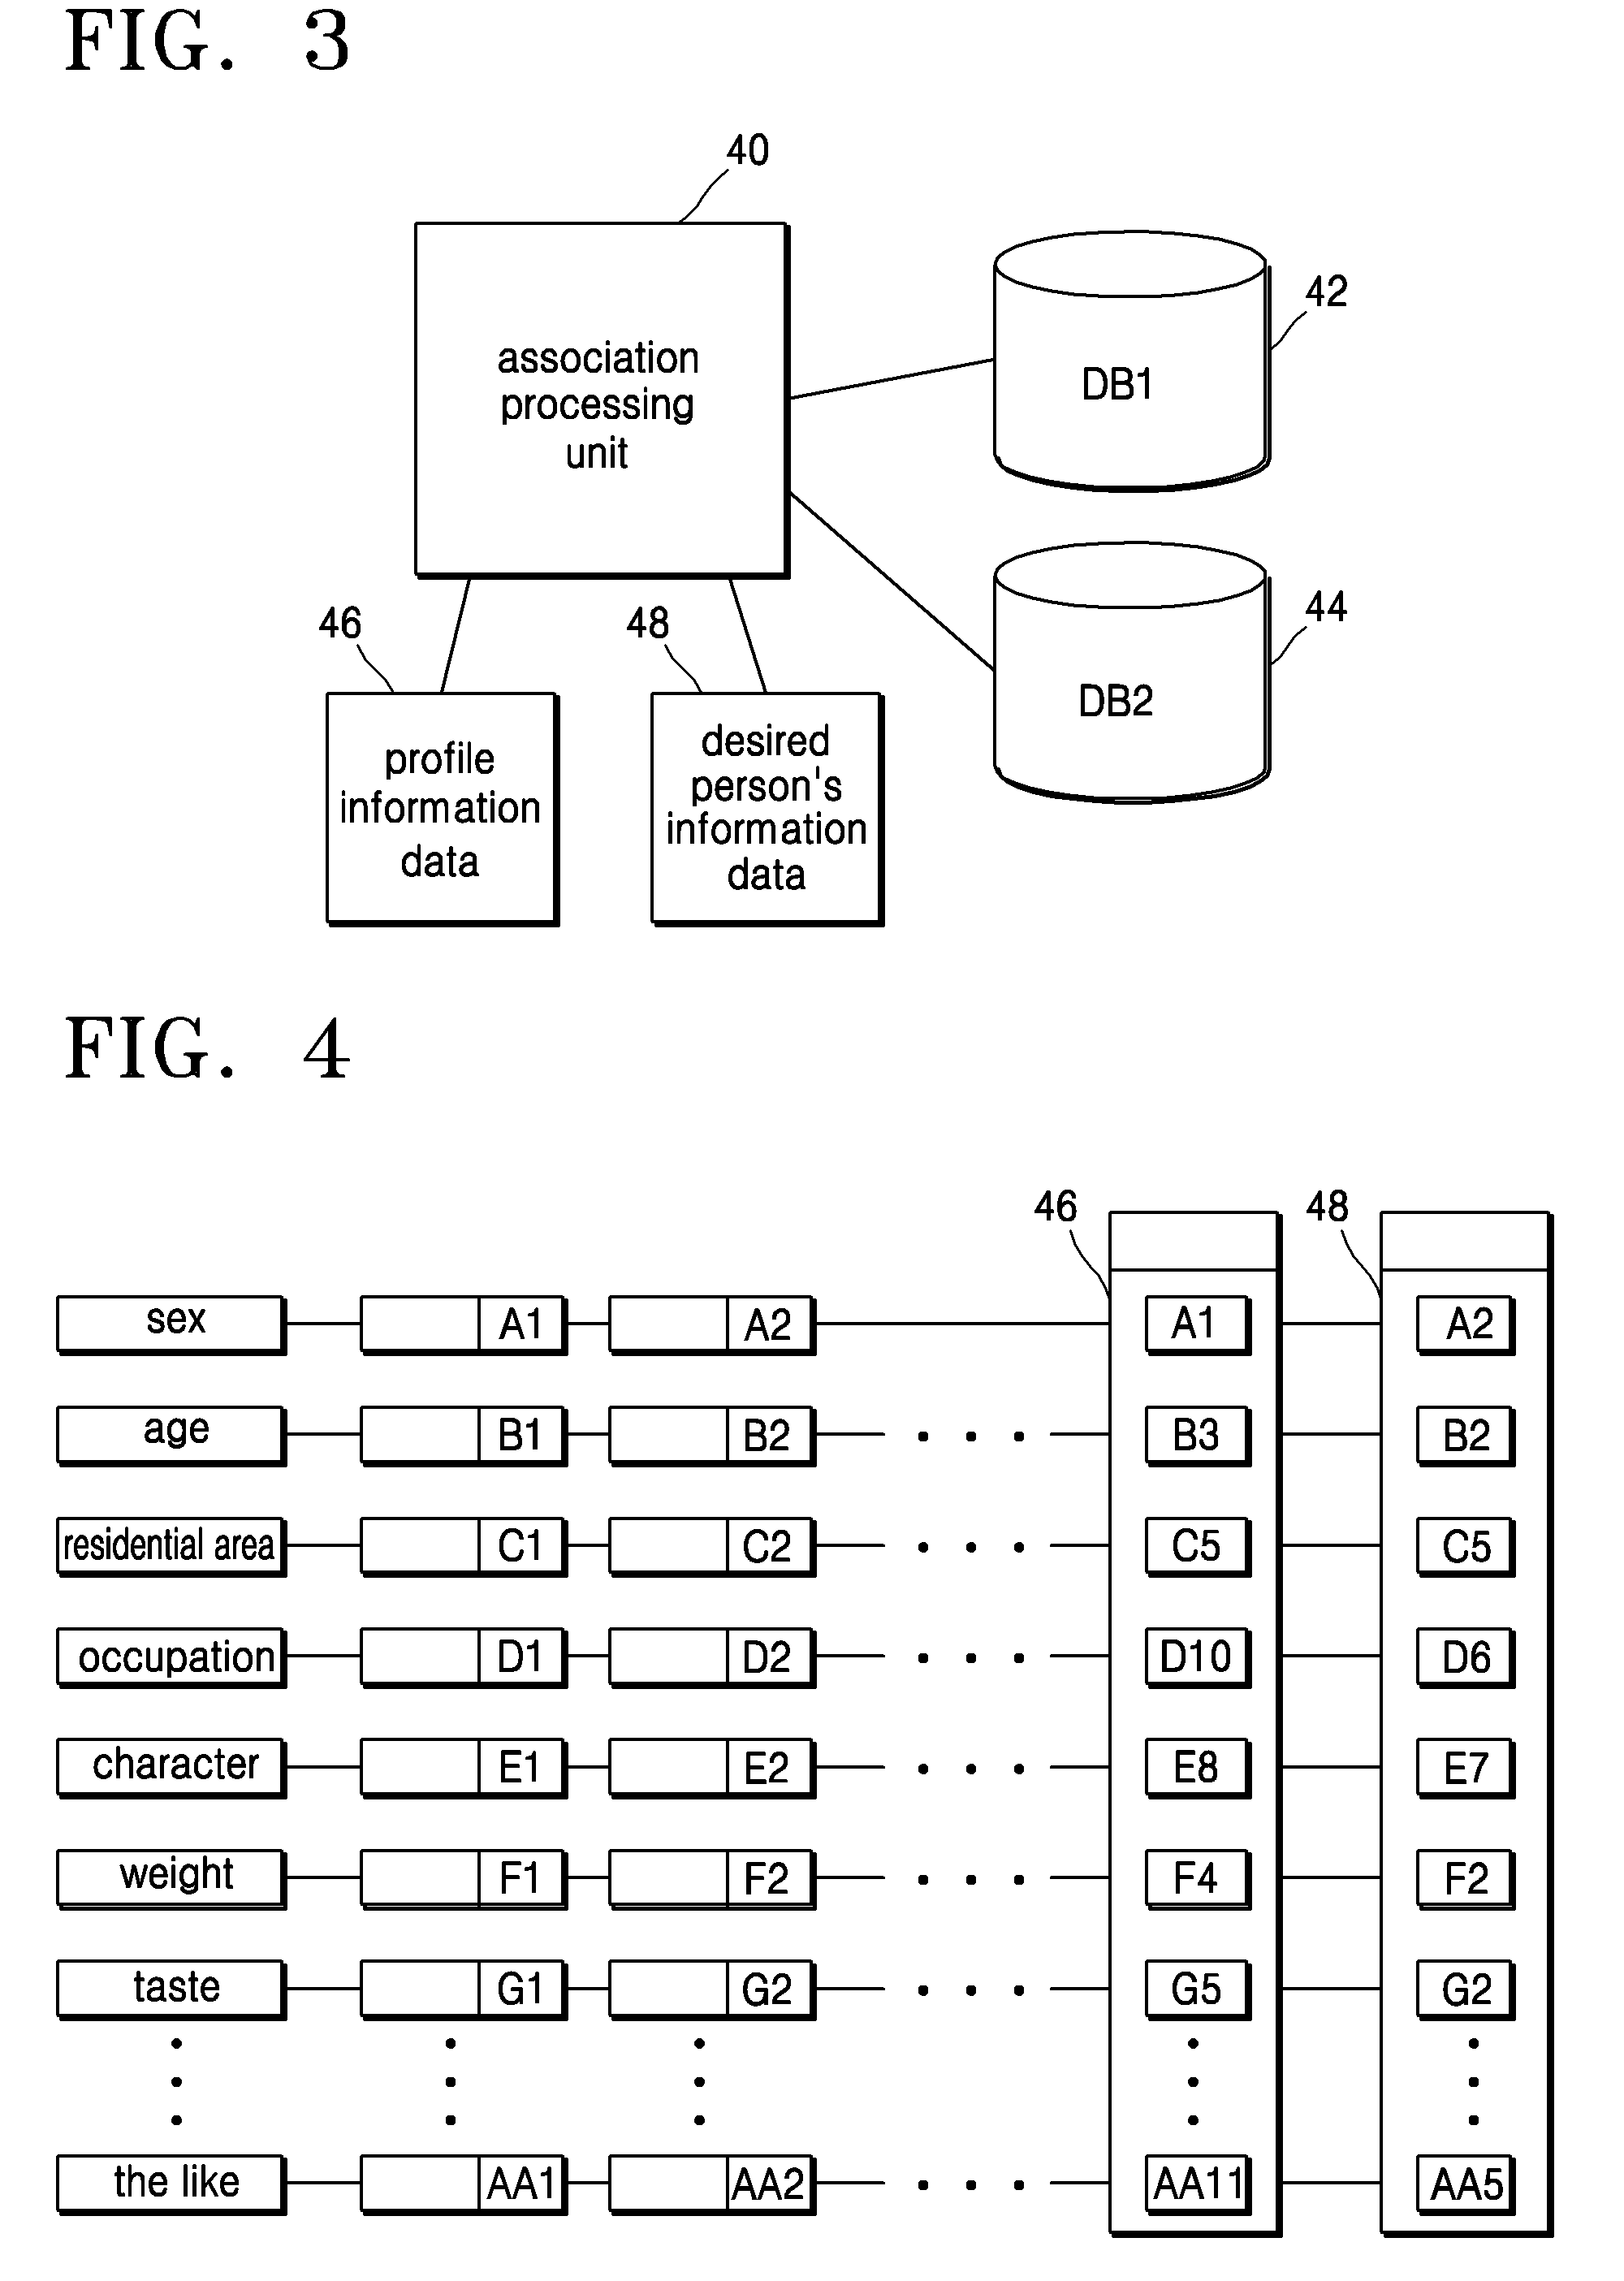 Apparatus and Method for Providing Service in Mobile Communication System